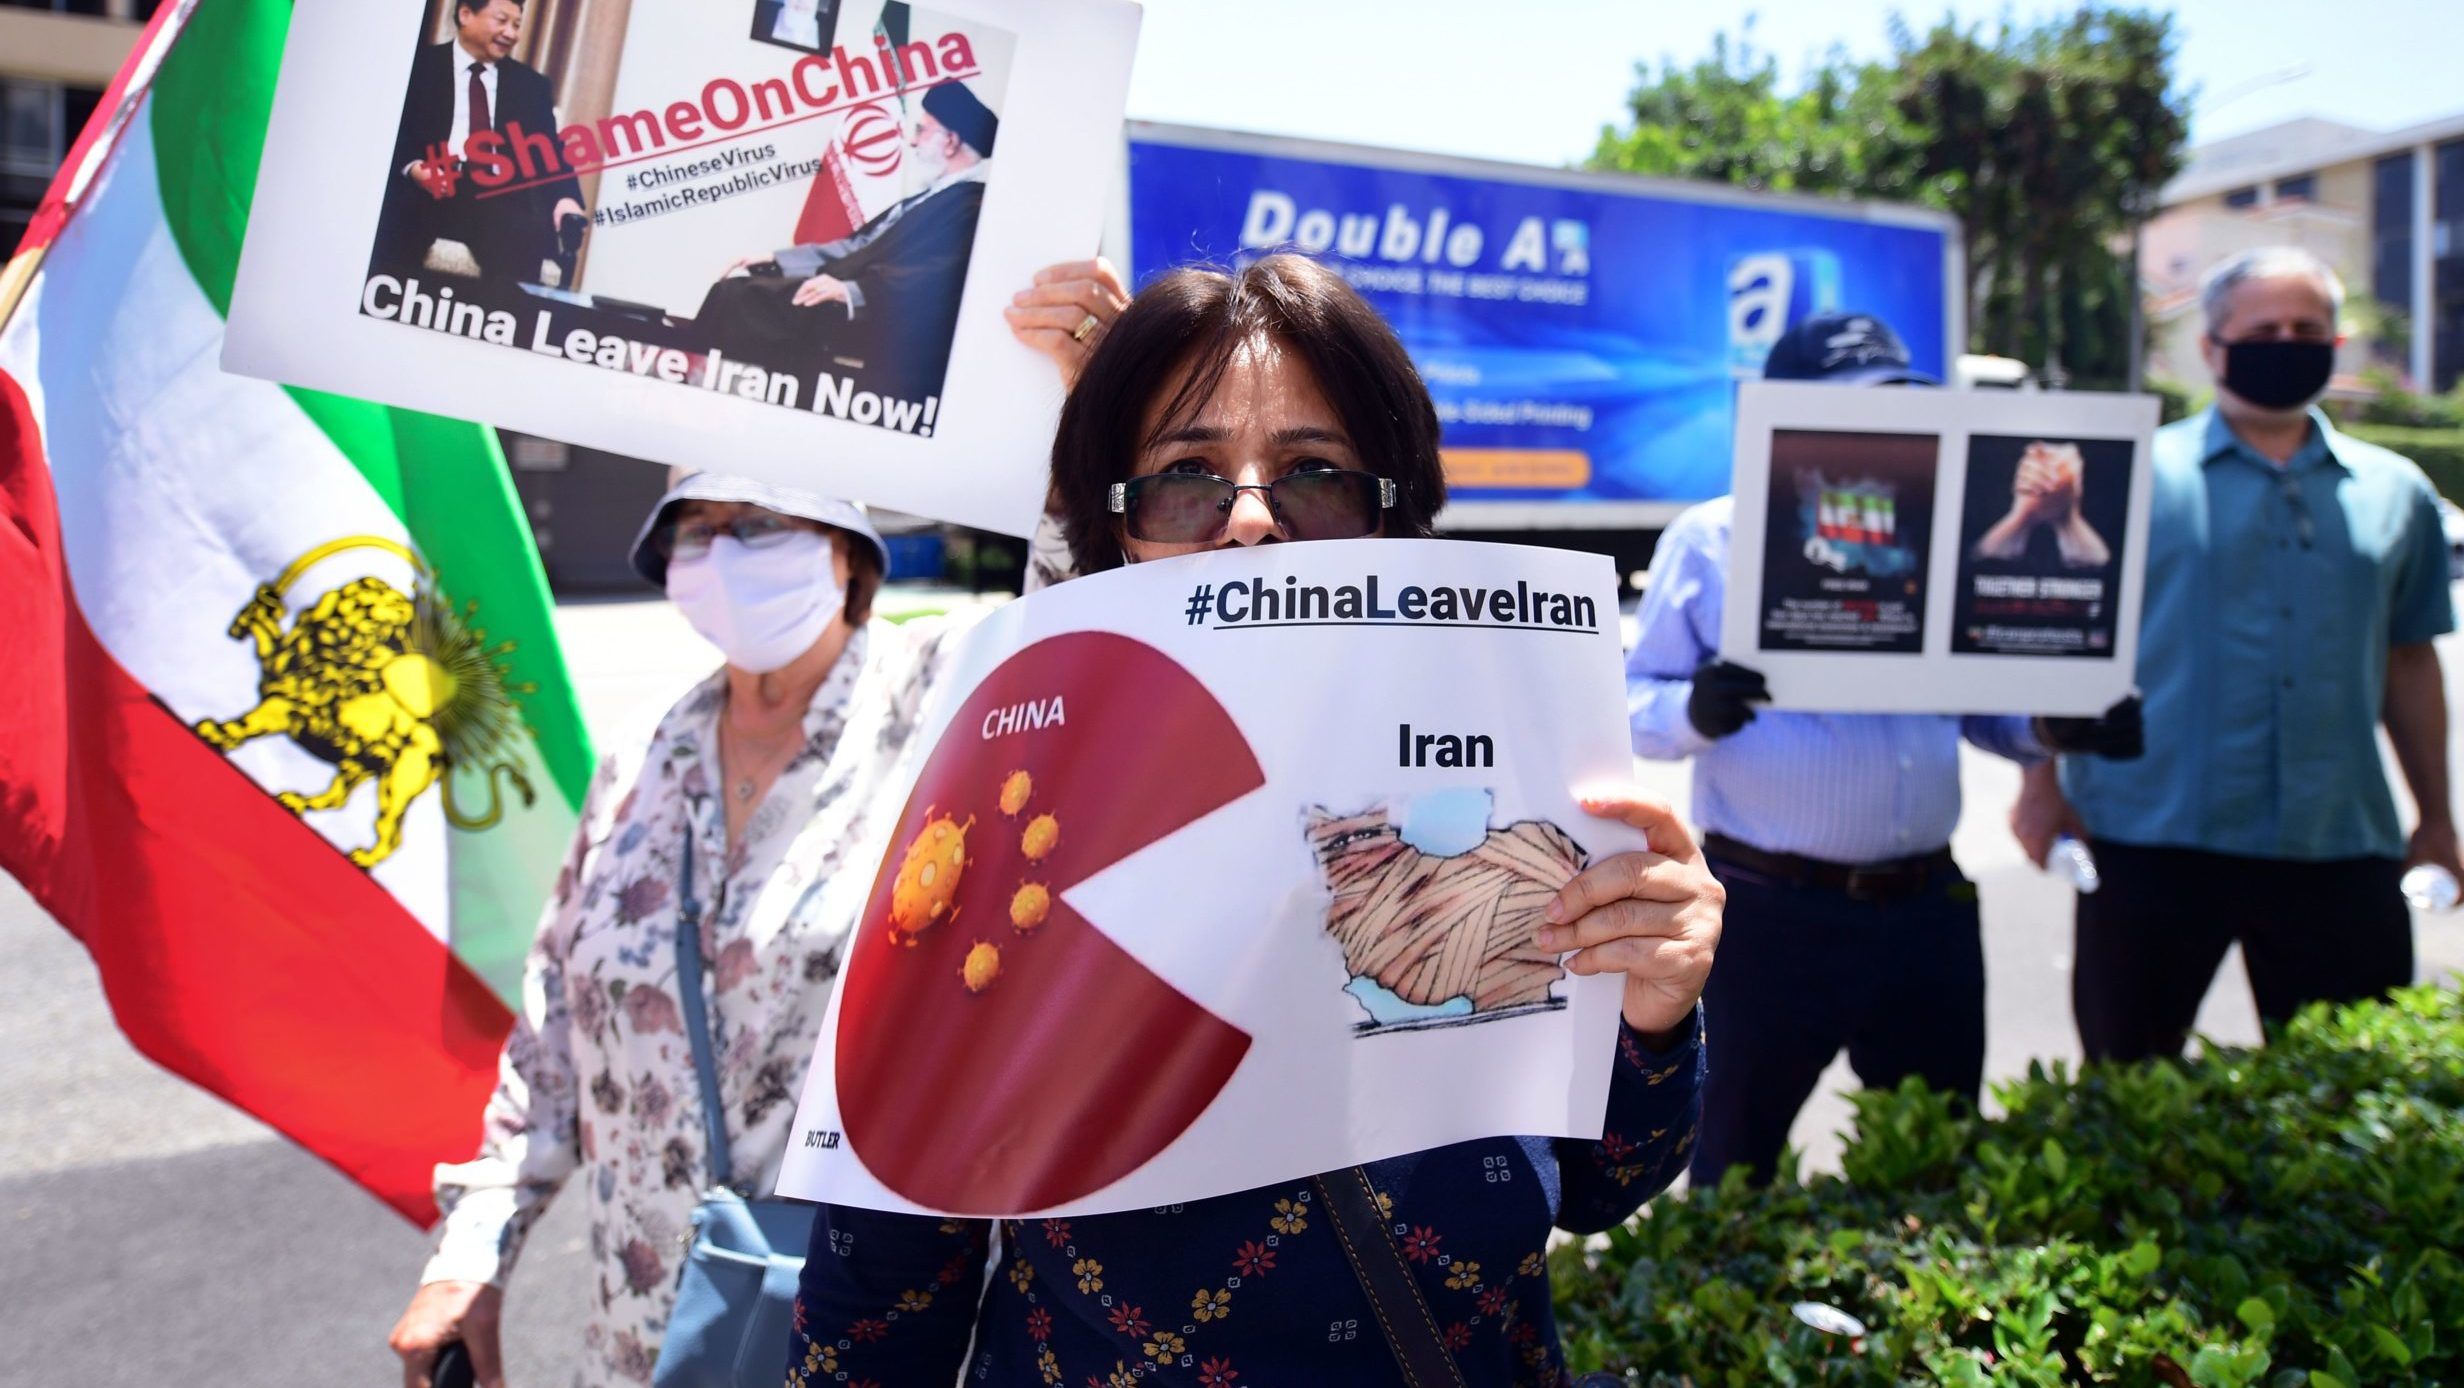 Questions Arise over China’s Agreement with Iran